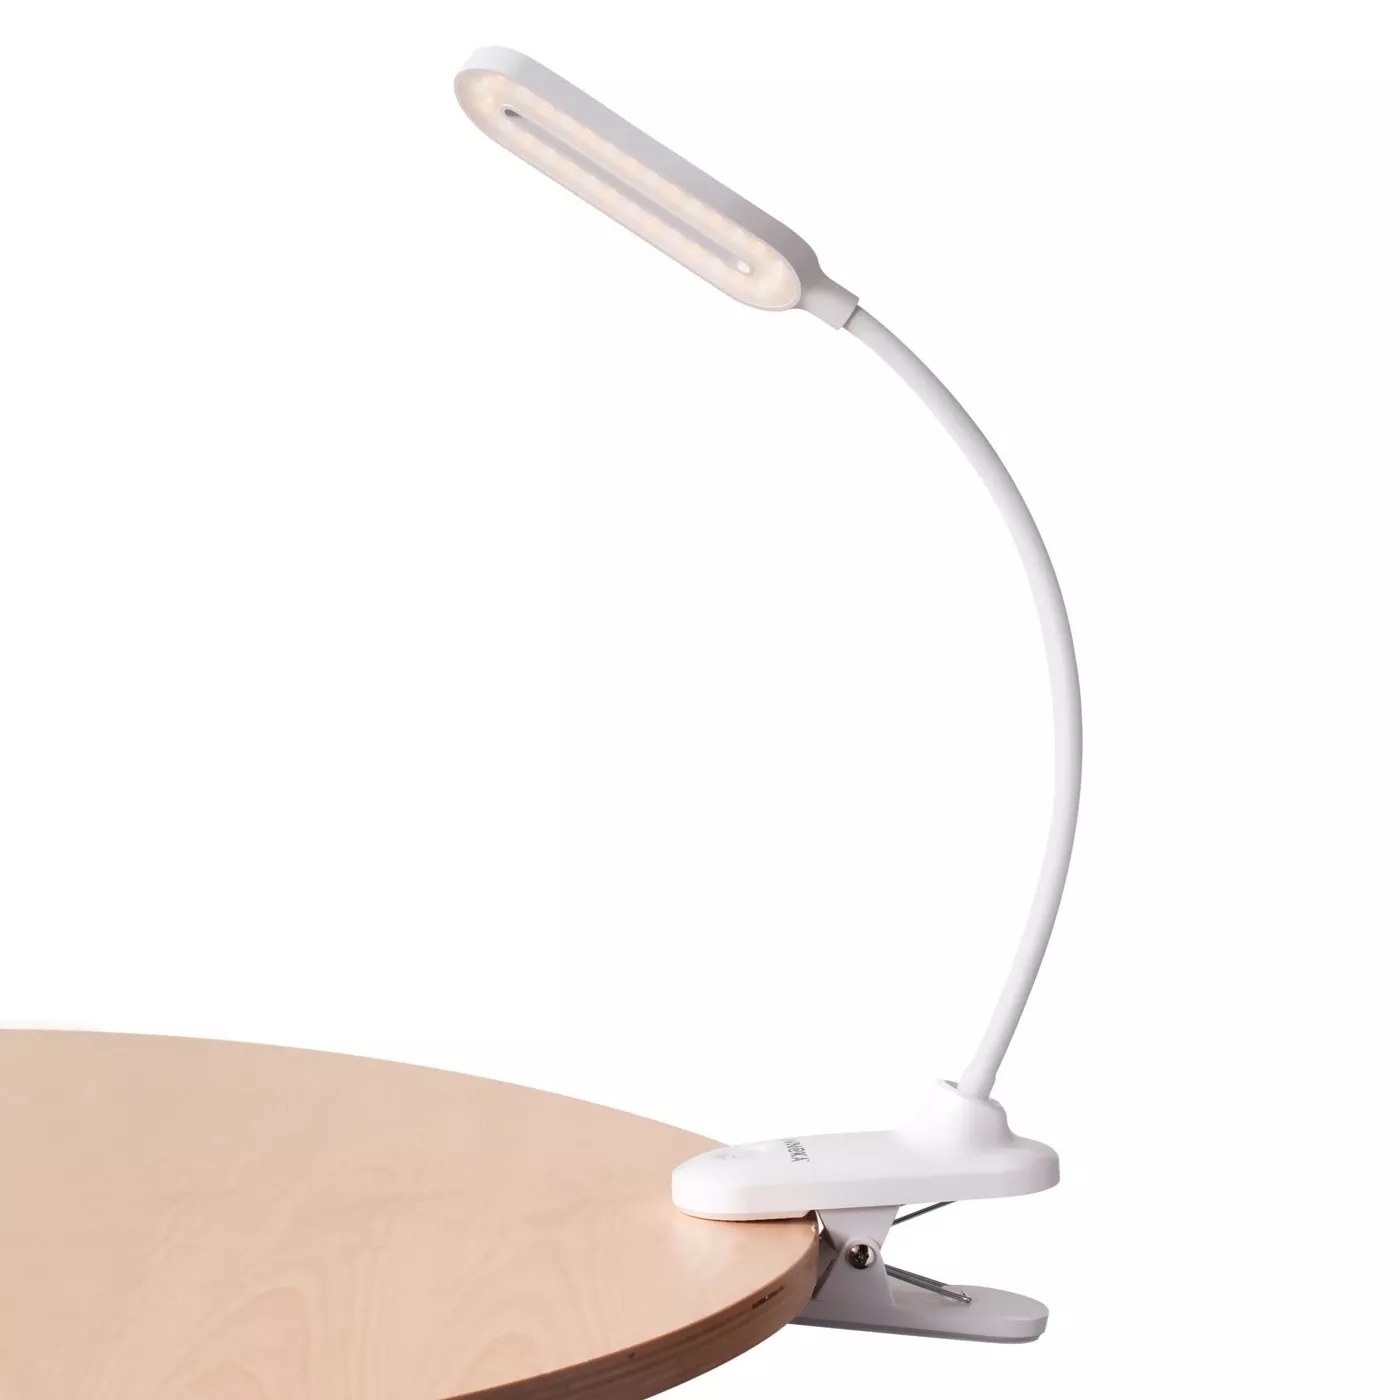 A white desk lamp clamped onto a table